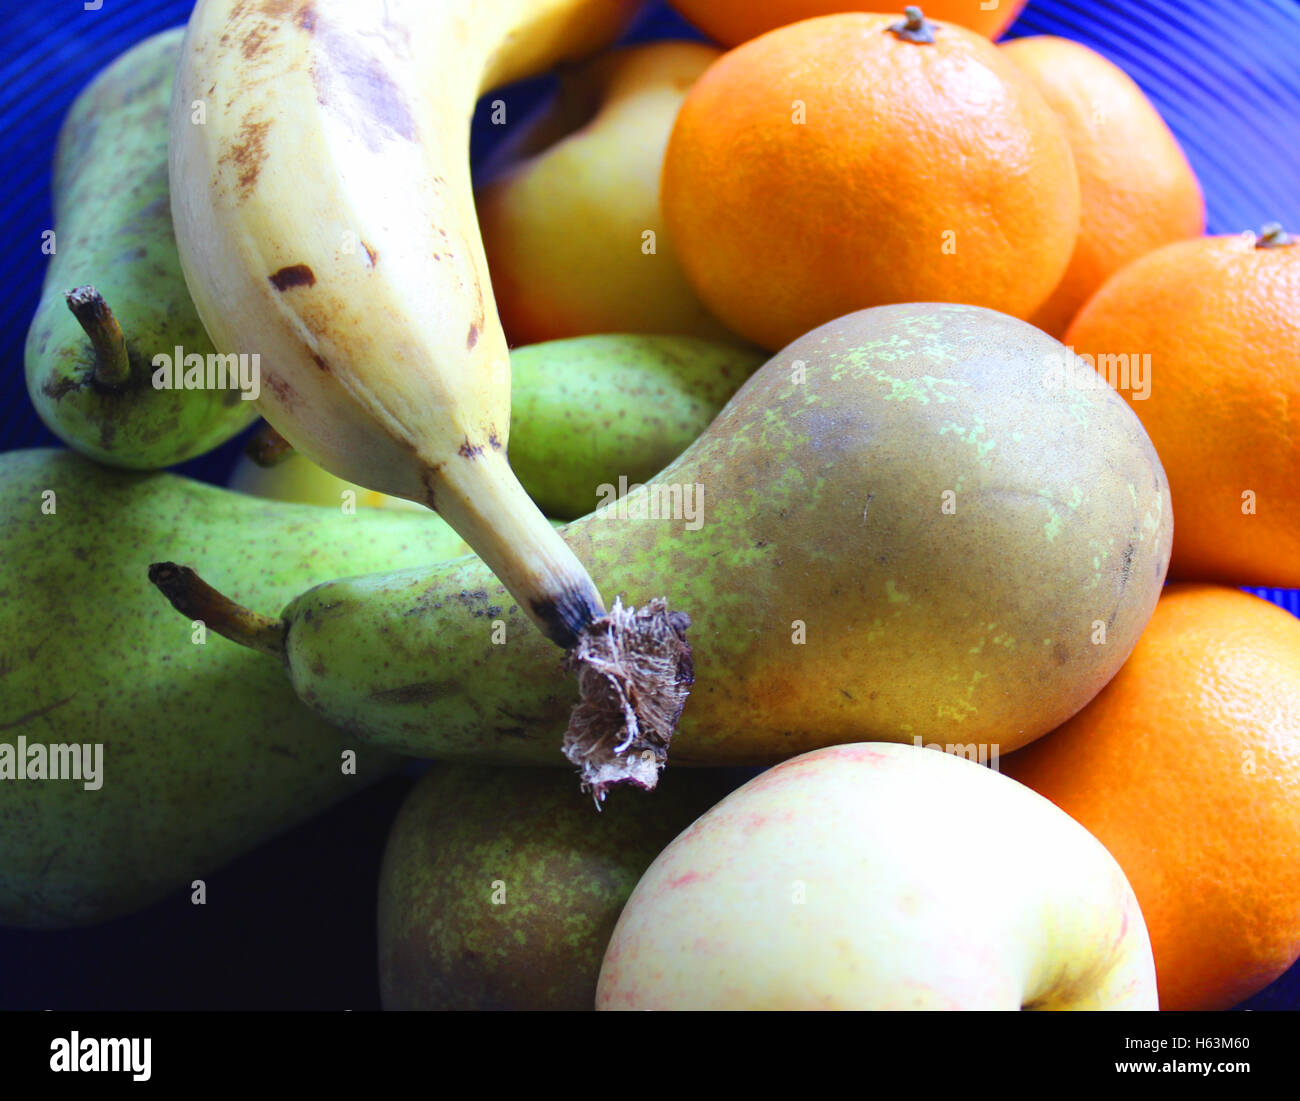 A bowl with fruits Stock Photo